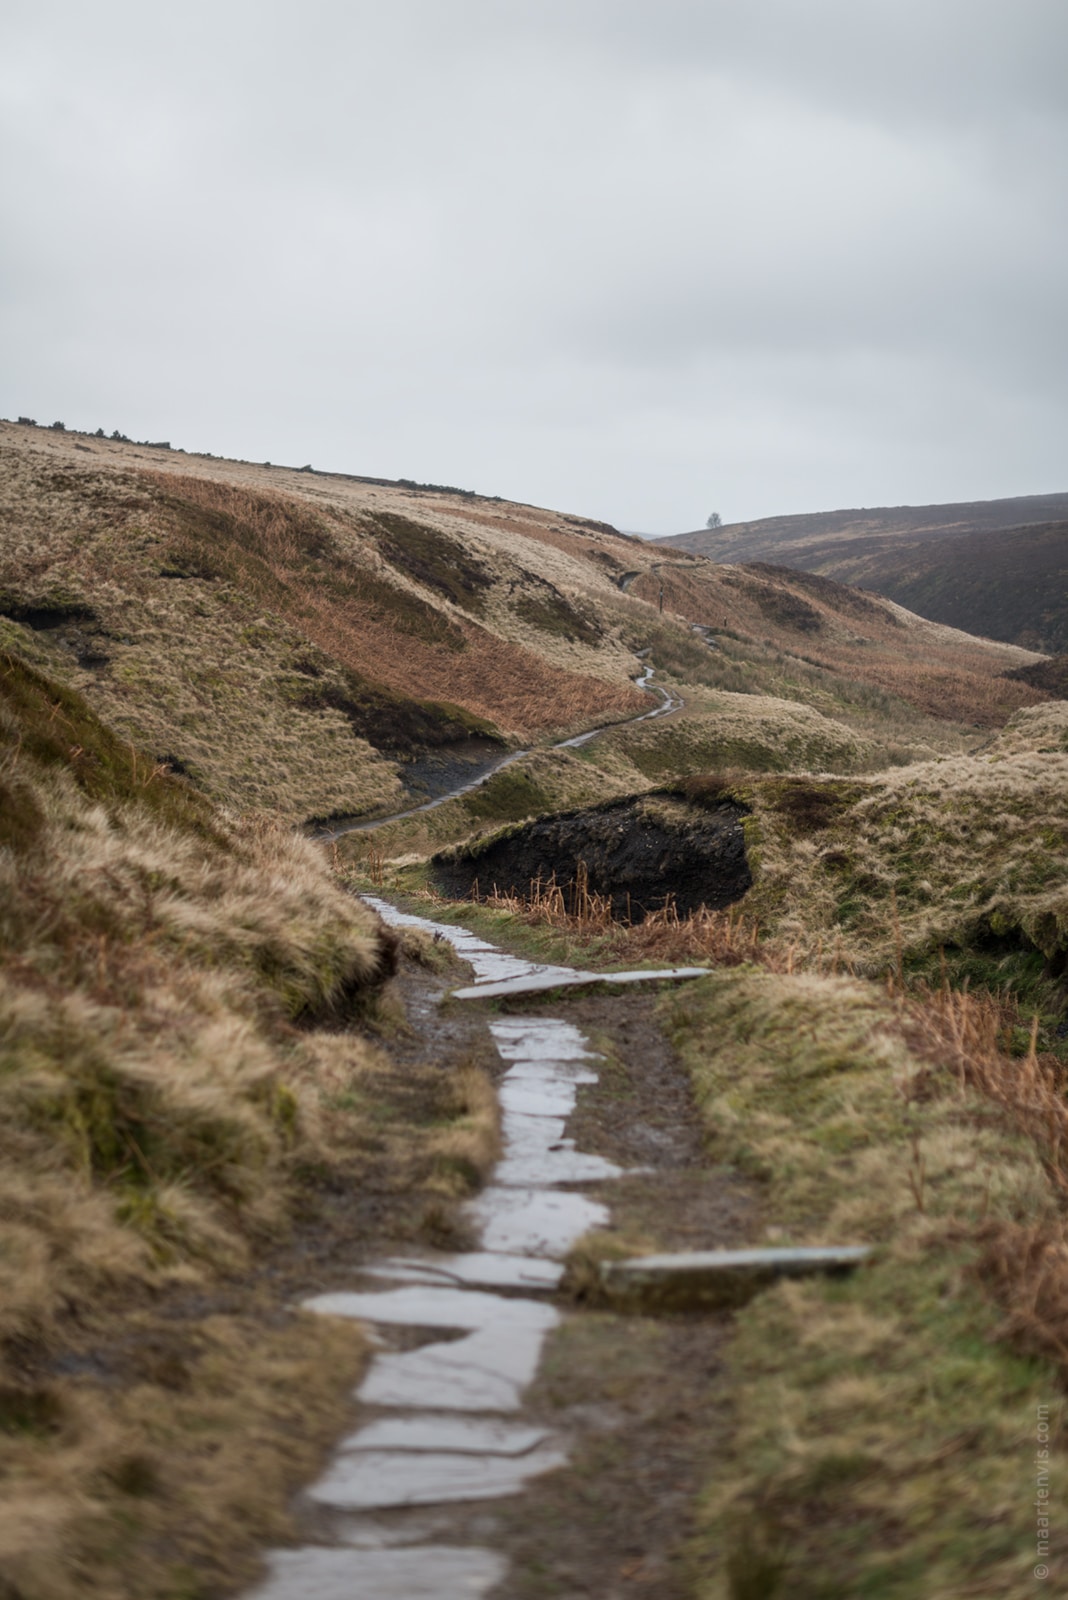 20160324 8166 - Hiking on the Moors with the Brontë sisters